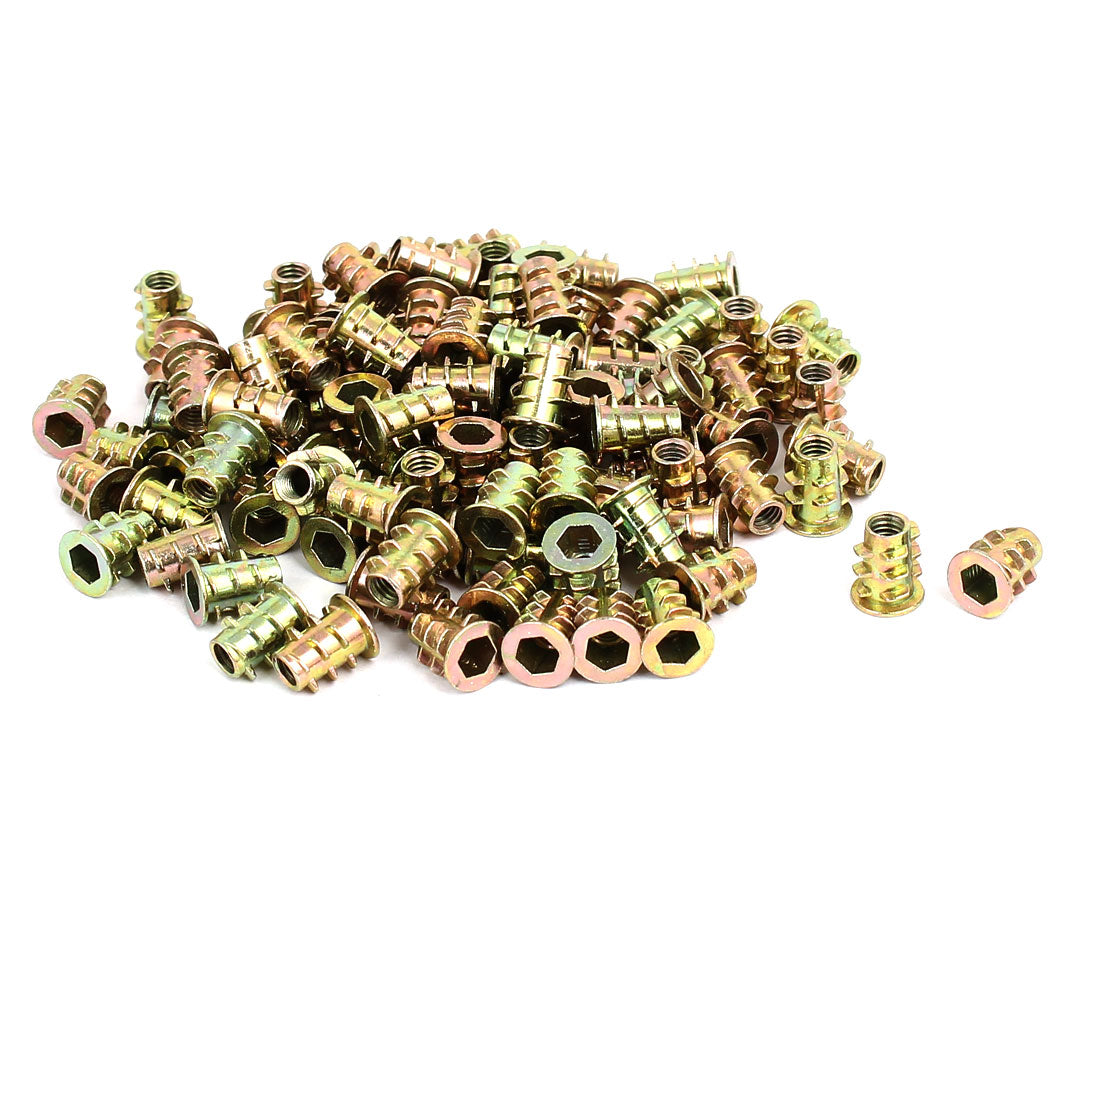 uxcell Uxcell M4x9.5mm Interface Hex Socket Threaded Insert Nuts 100pcs for Wood Furniture